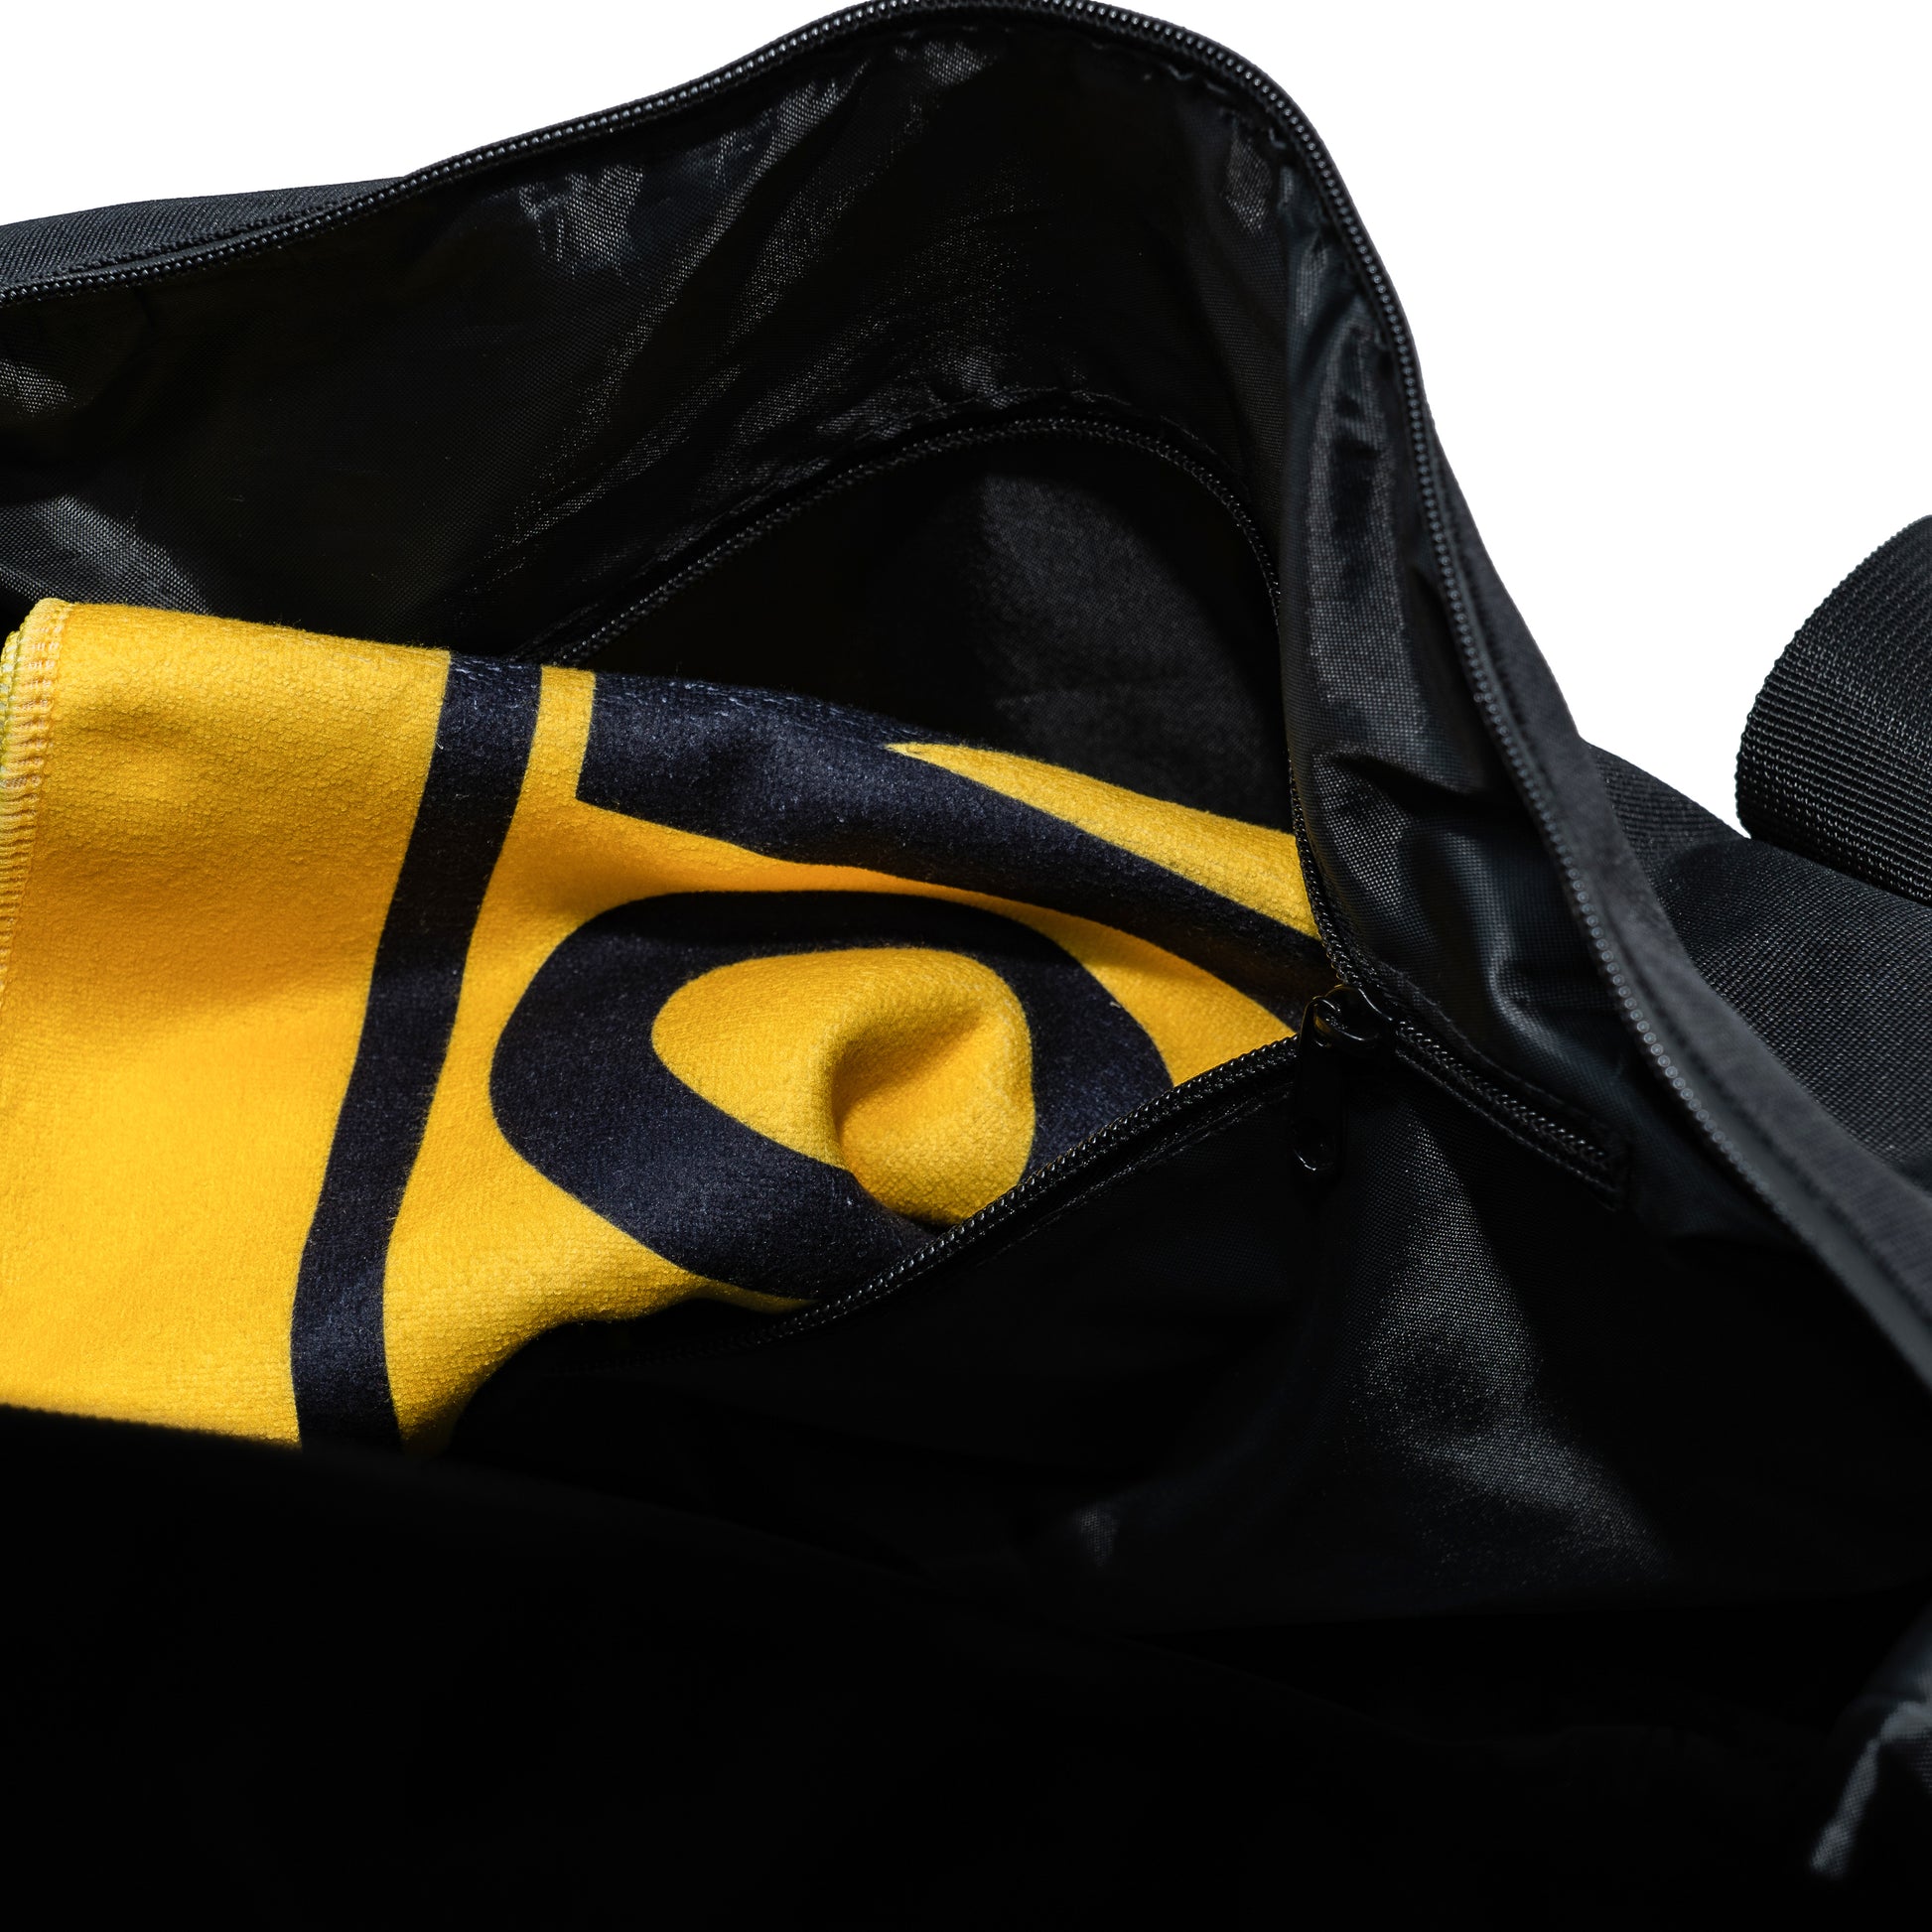 a yellow sport towel stashed in a zip pocket